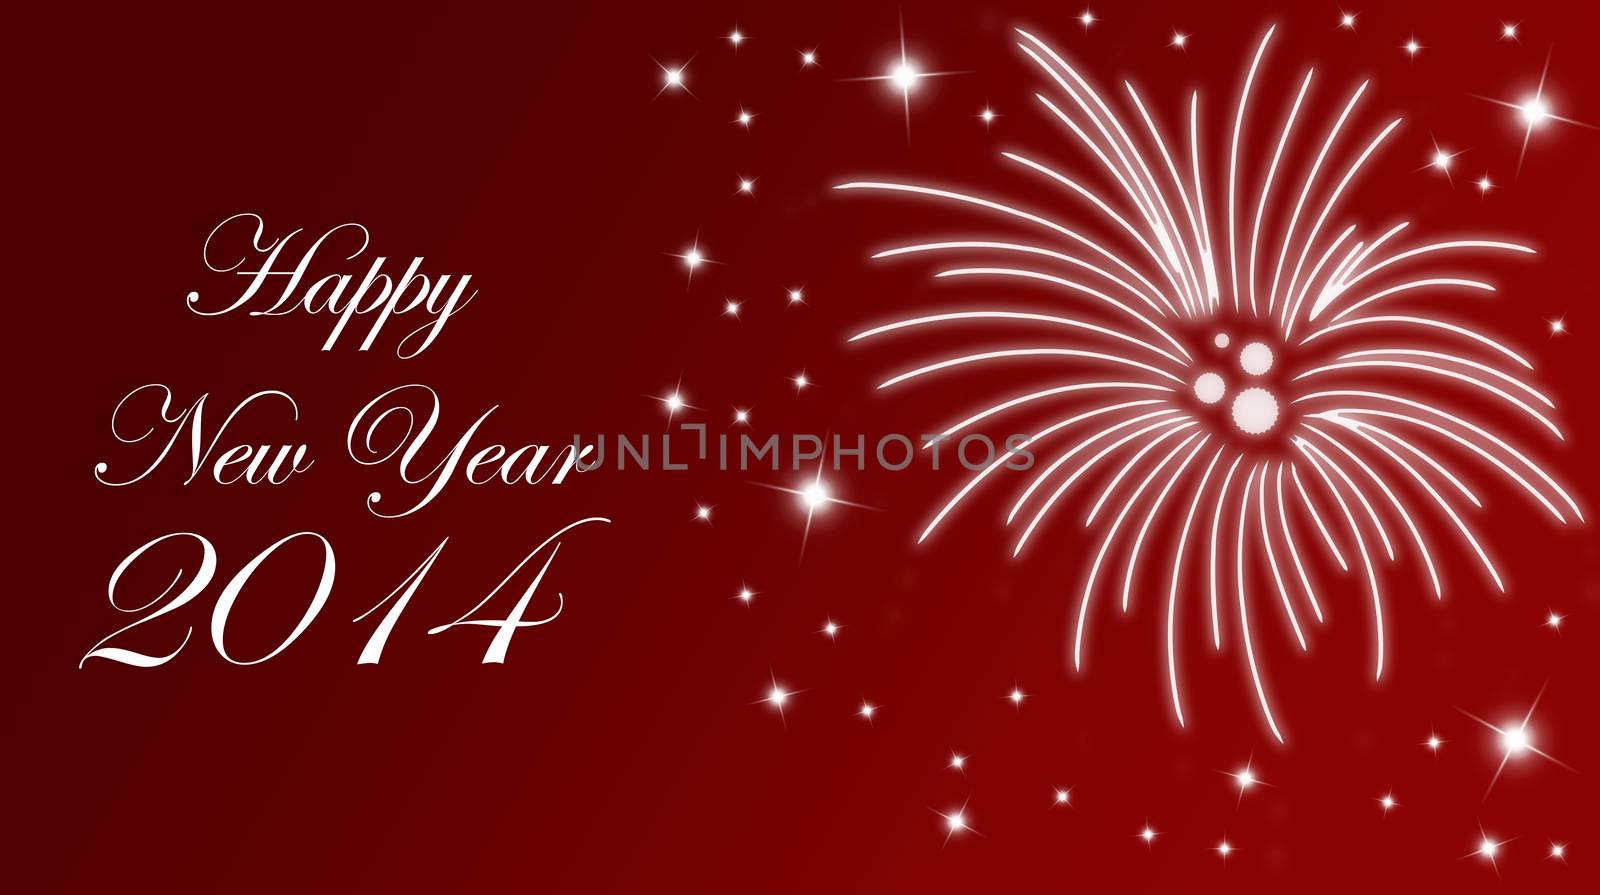 Holiday background for New Year 2014 with fireworks
